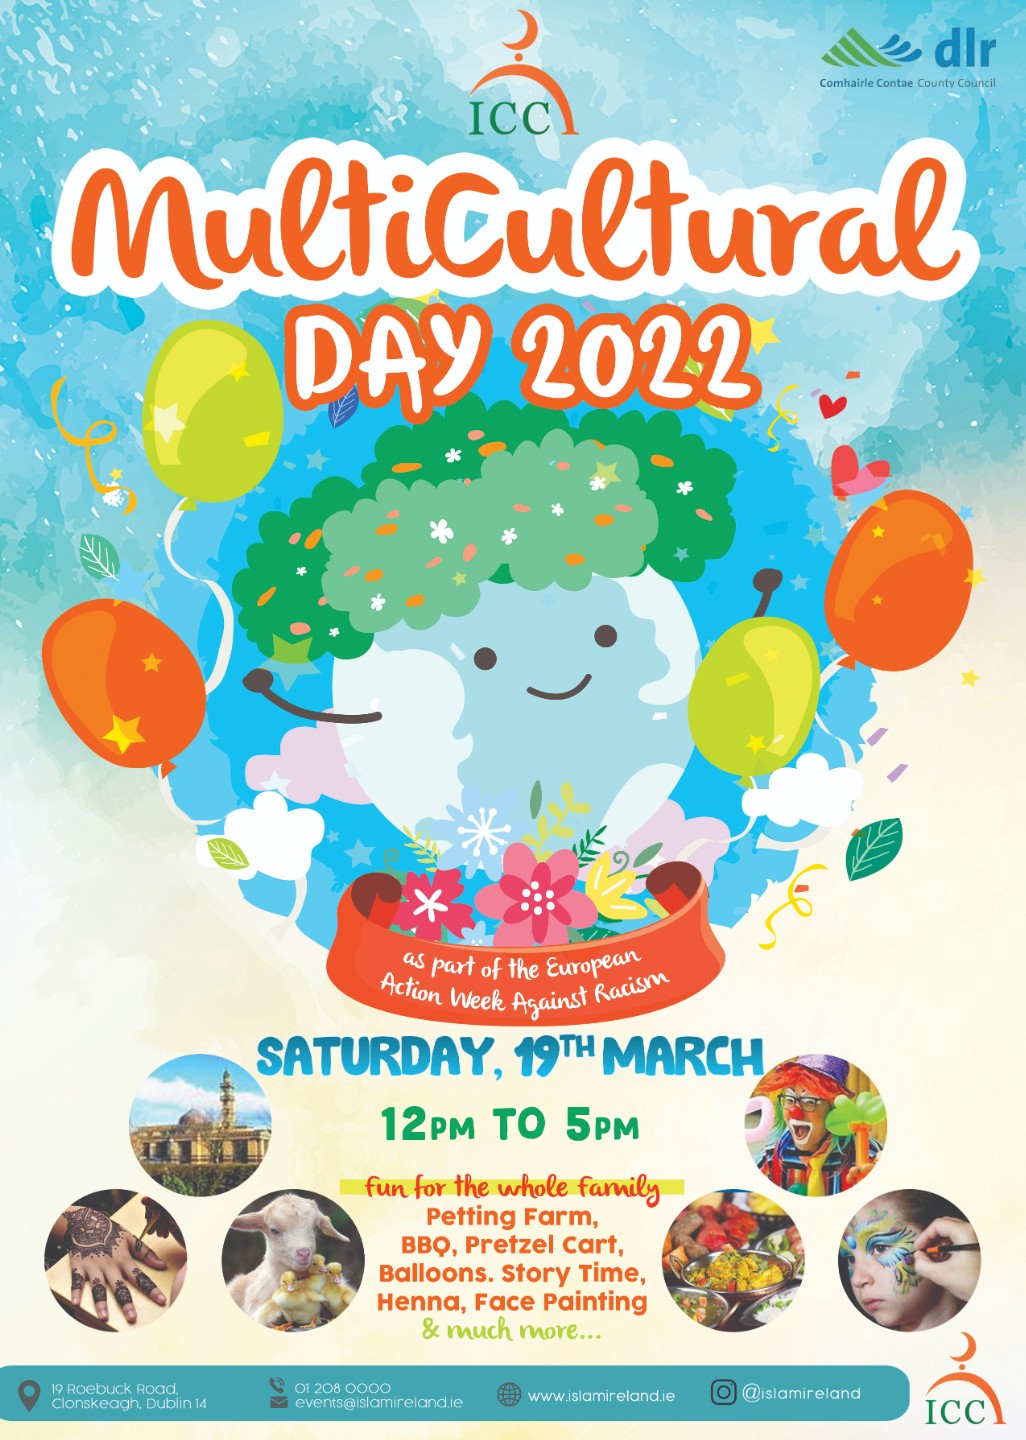 ICCI Multicultural Day 2022 March 19th